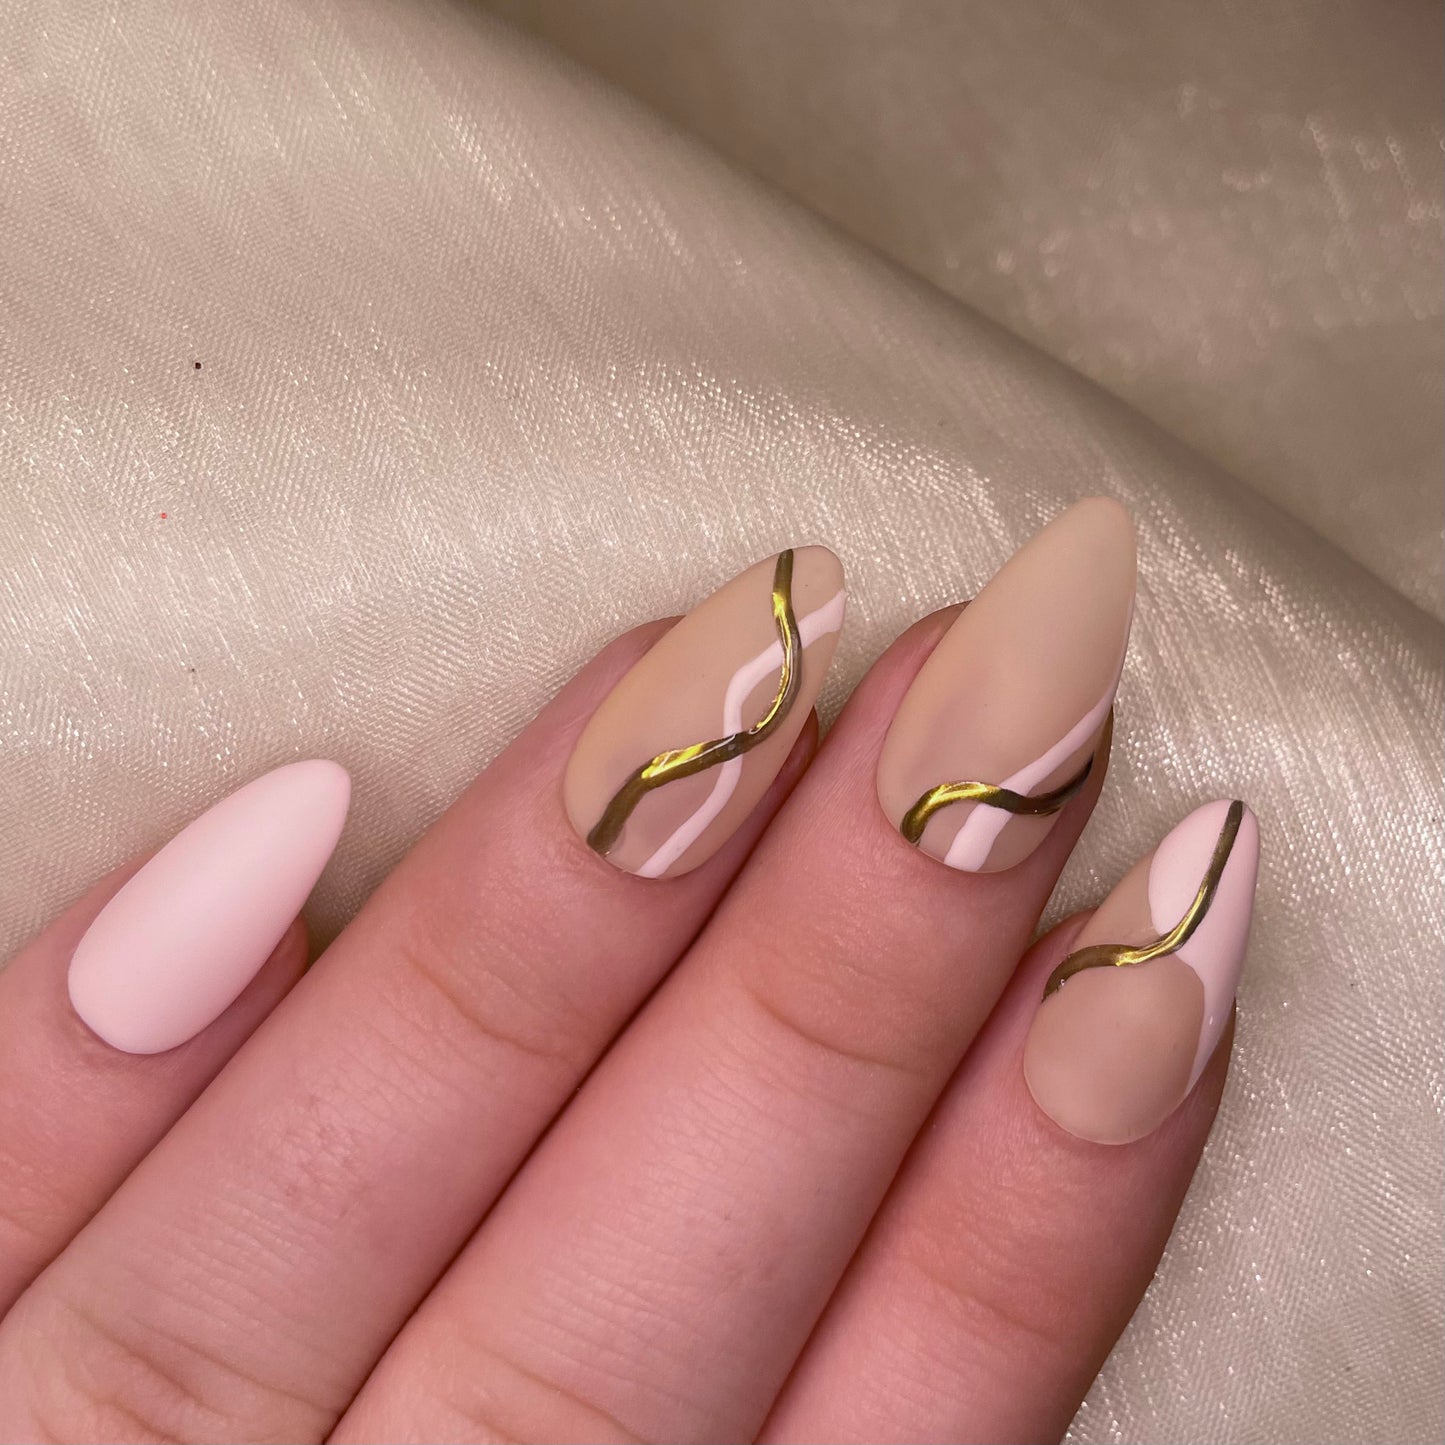 Sheer Nude and Pink Almonds with Gold Chrome